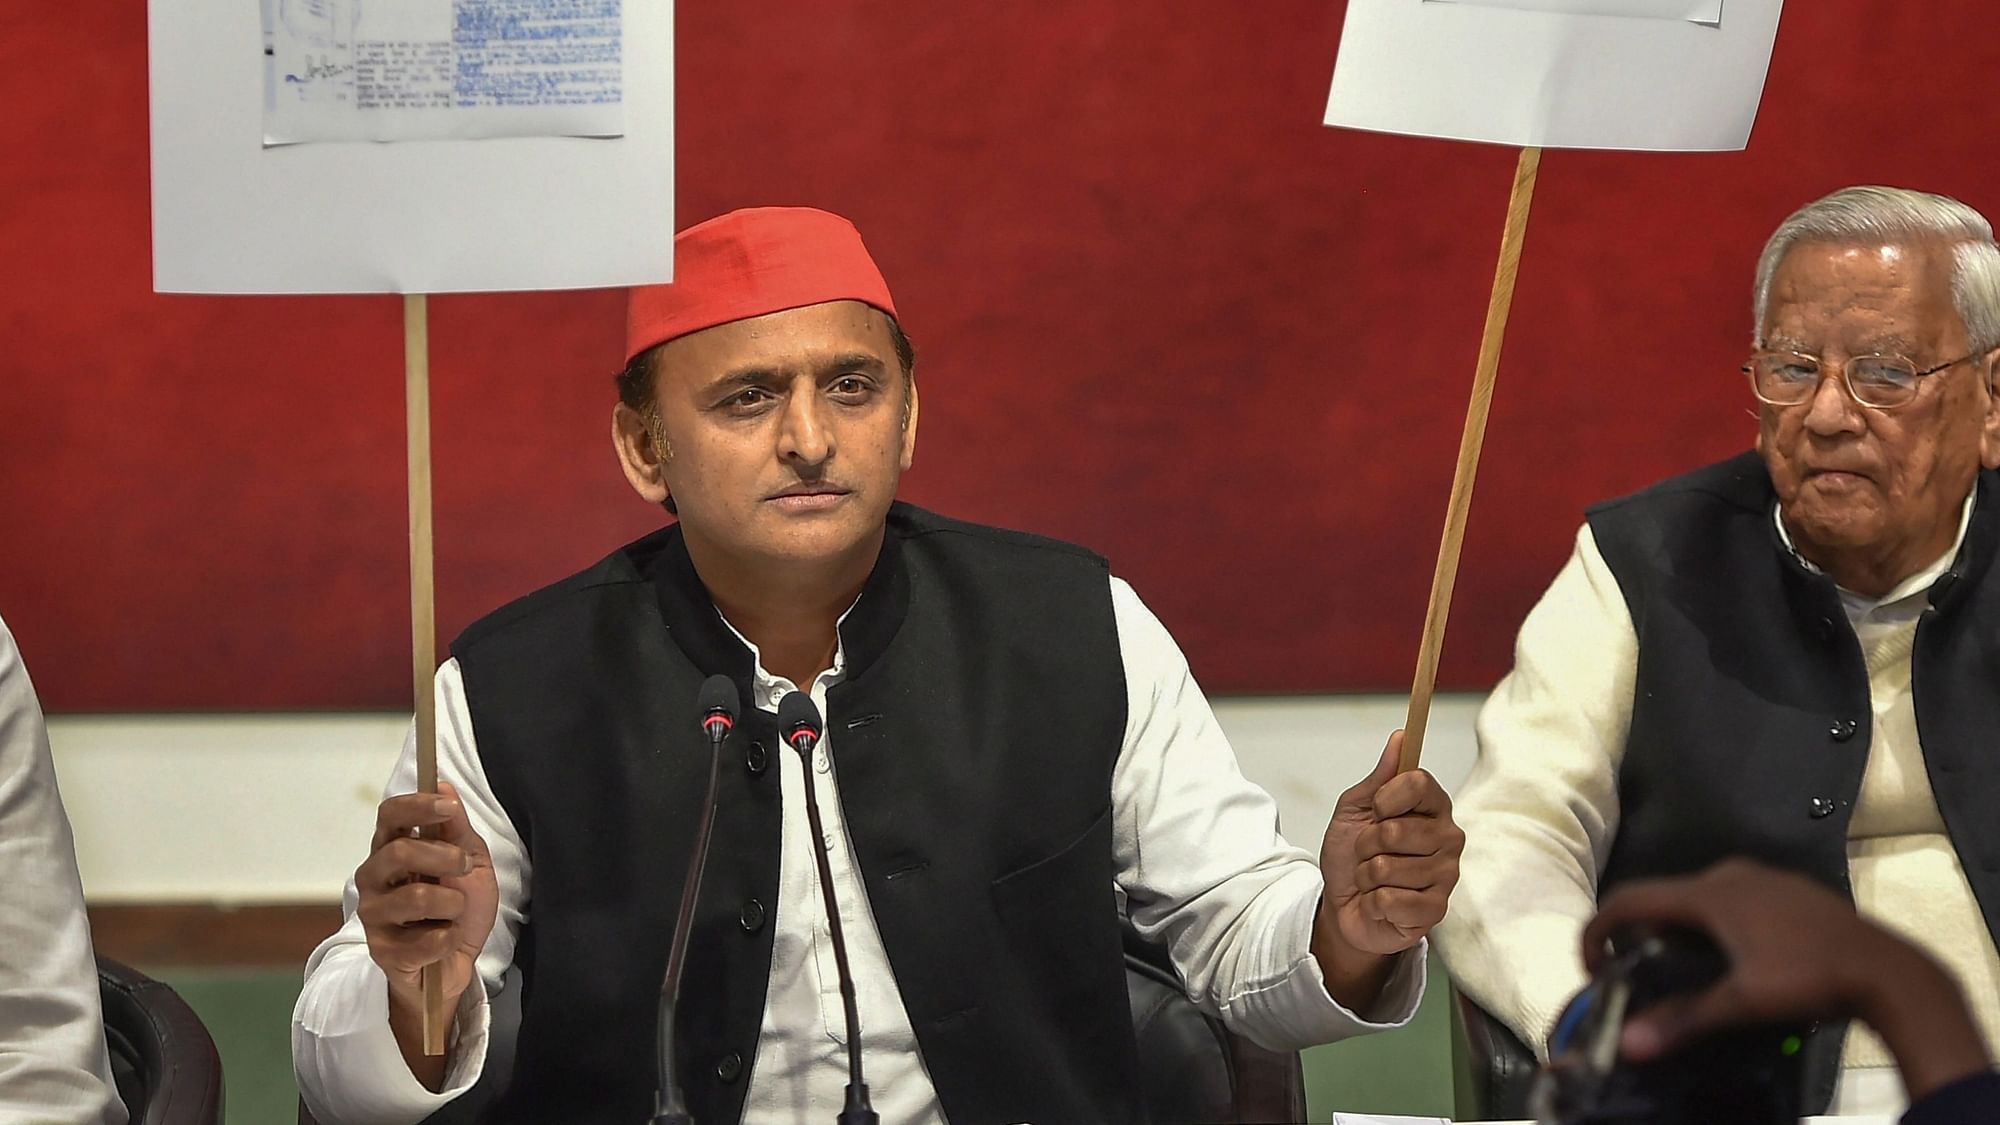 Samajwadi Party President and former Uttar Pradesh Chief Minister Akhilesh Yadav addresses a press conference after he was stopped at Chaudhary Charan Singh International Airport in Lucknow.